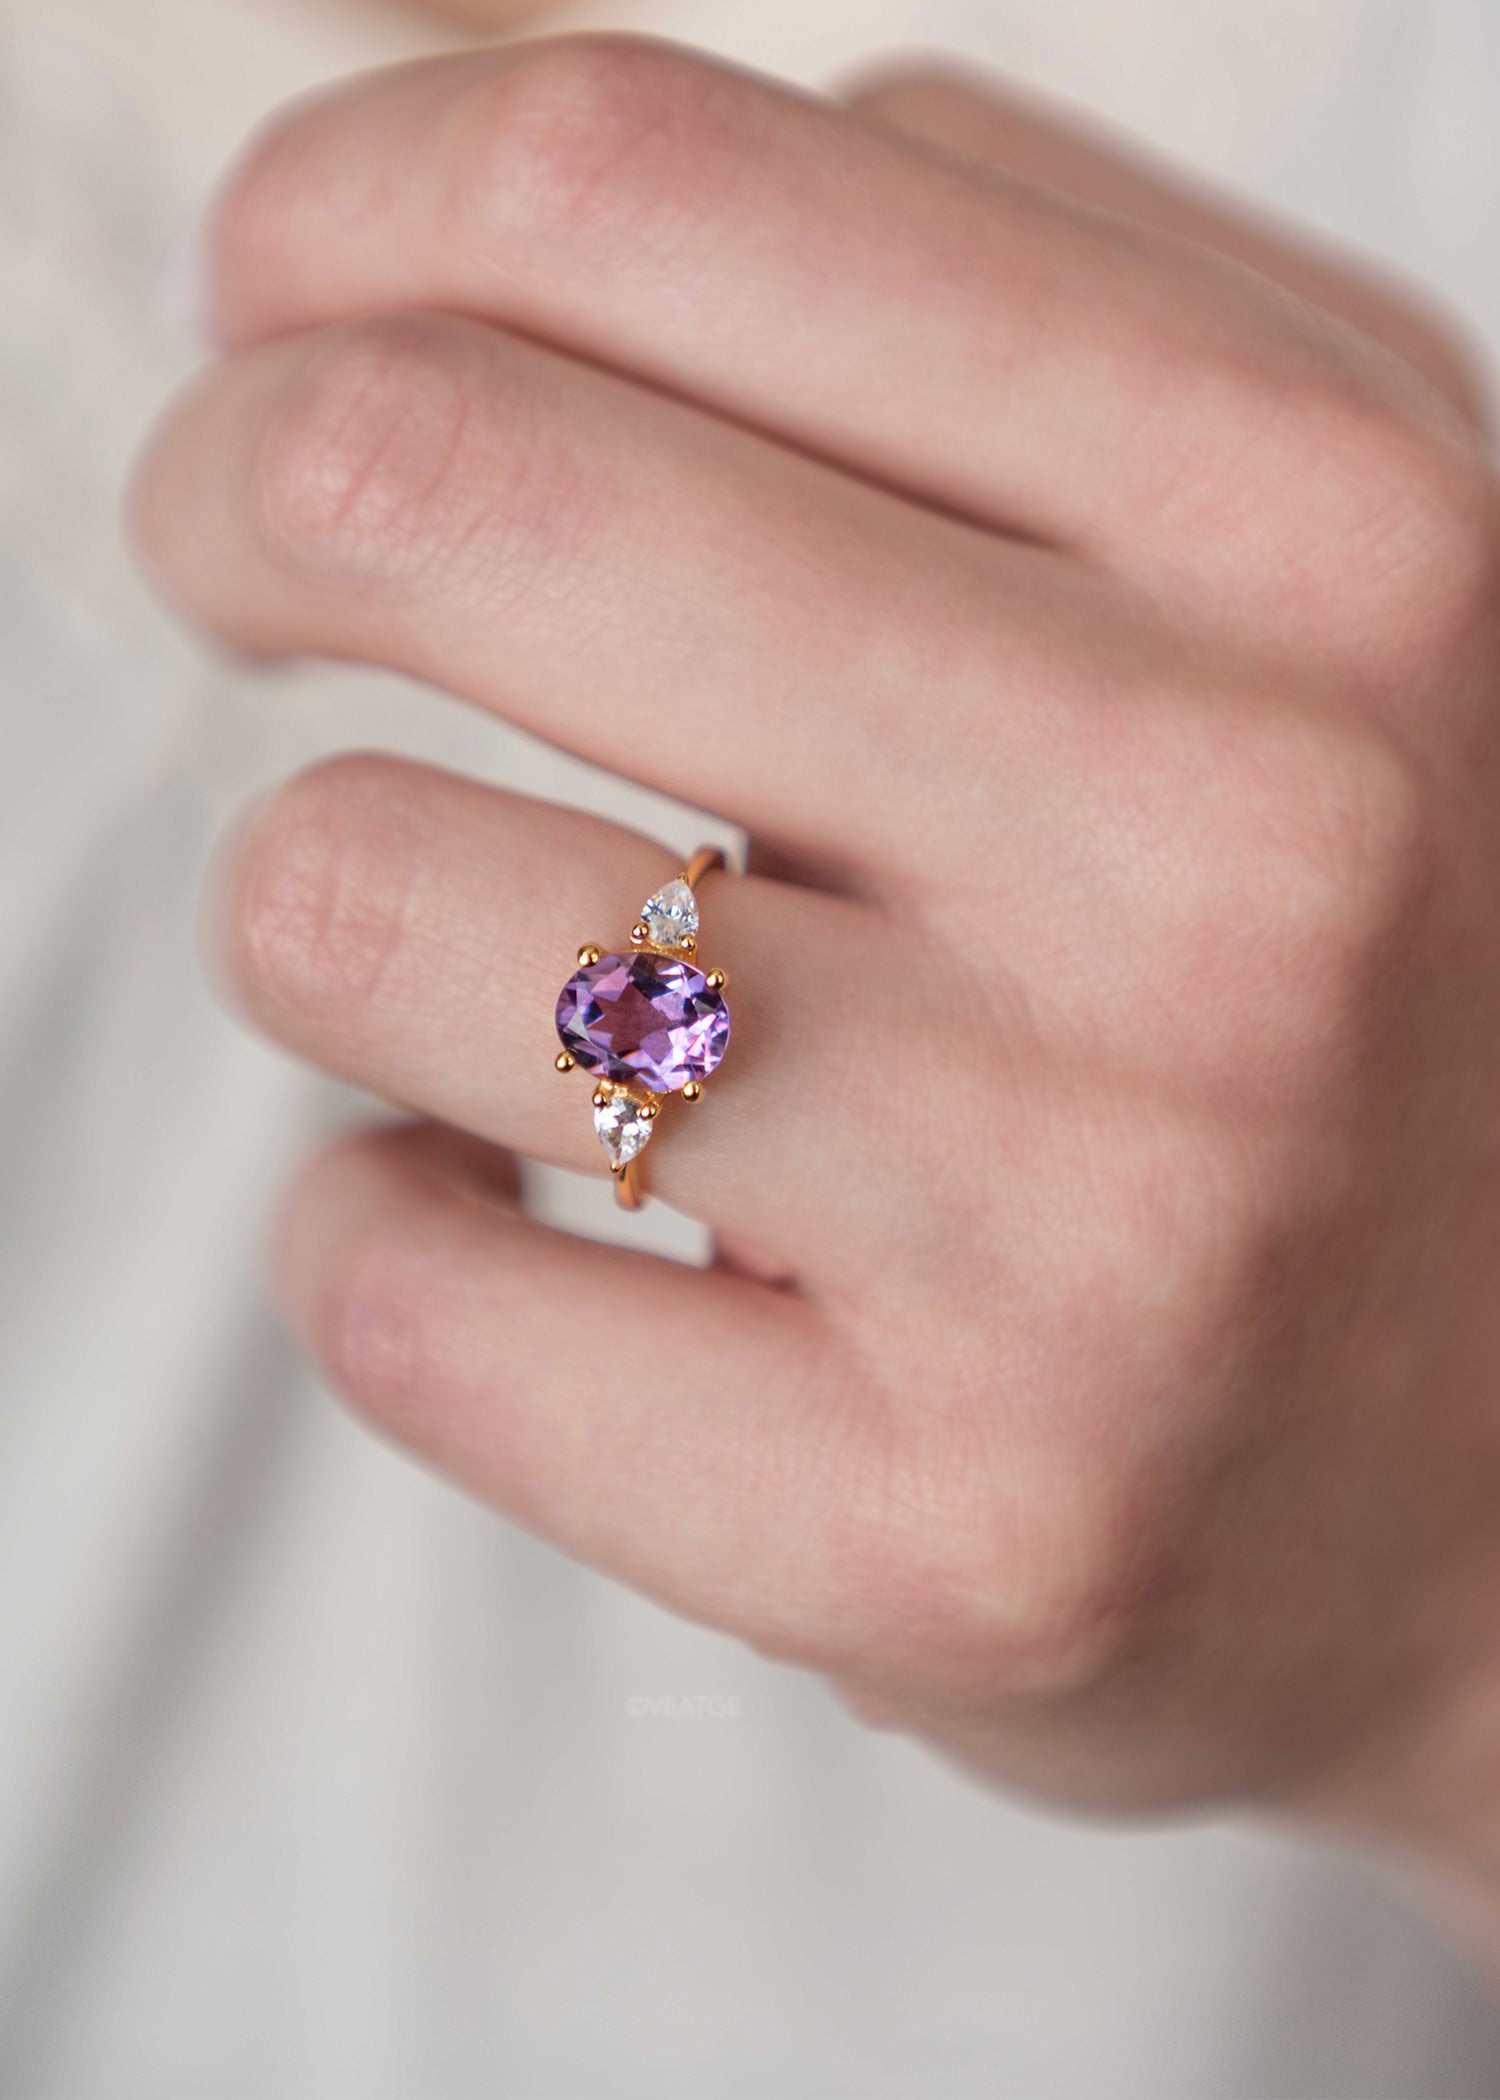 Amethyst Ring 925 Sterling Silver Gold Engagement Proposal Anniversary Birthday February Birthstone Ring Rings Gifts for Women Girlfriend Promise Rings